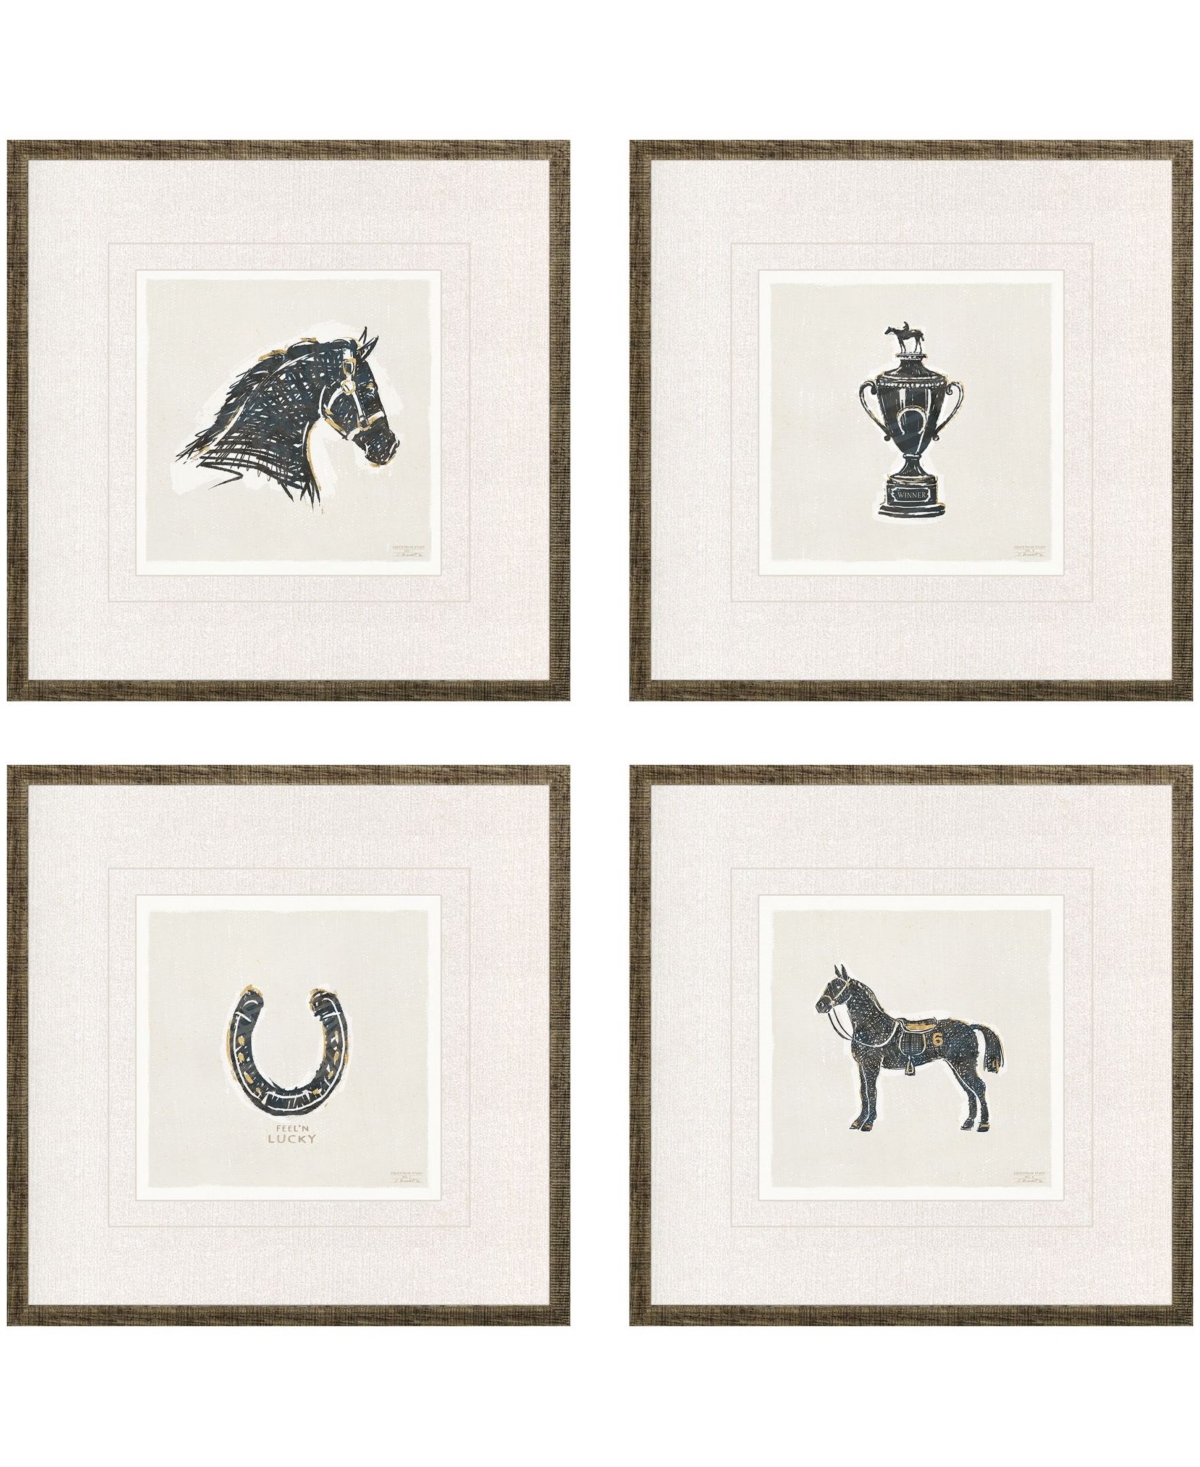 Paragon Picture Gallery Equestrian Framed Art, Set Of 4 In Black